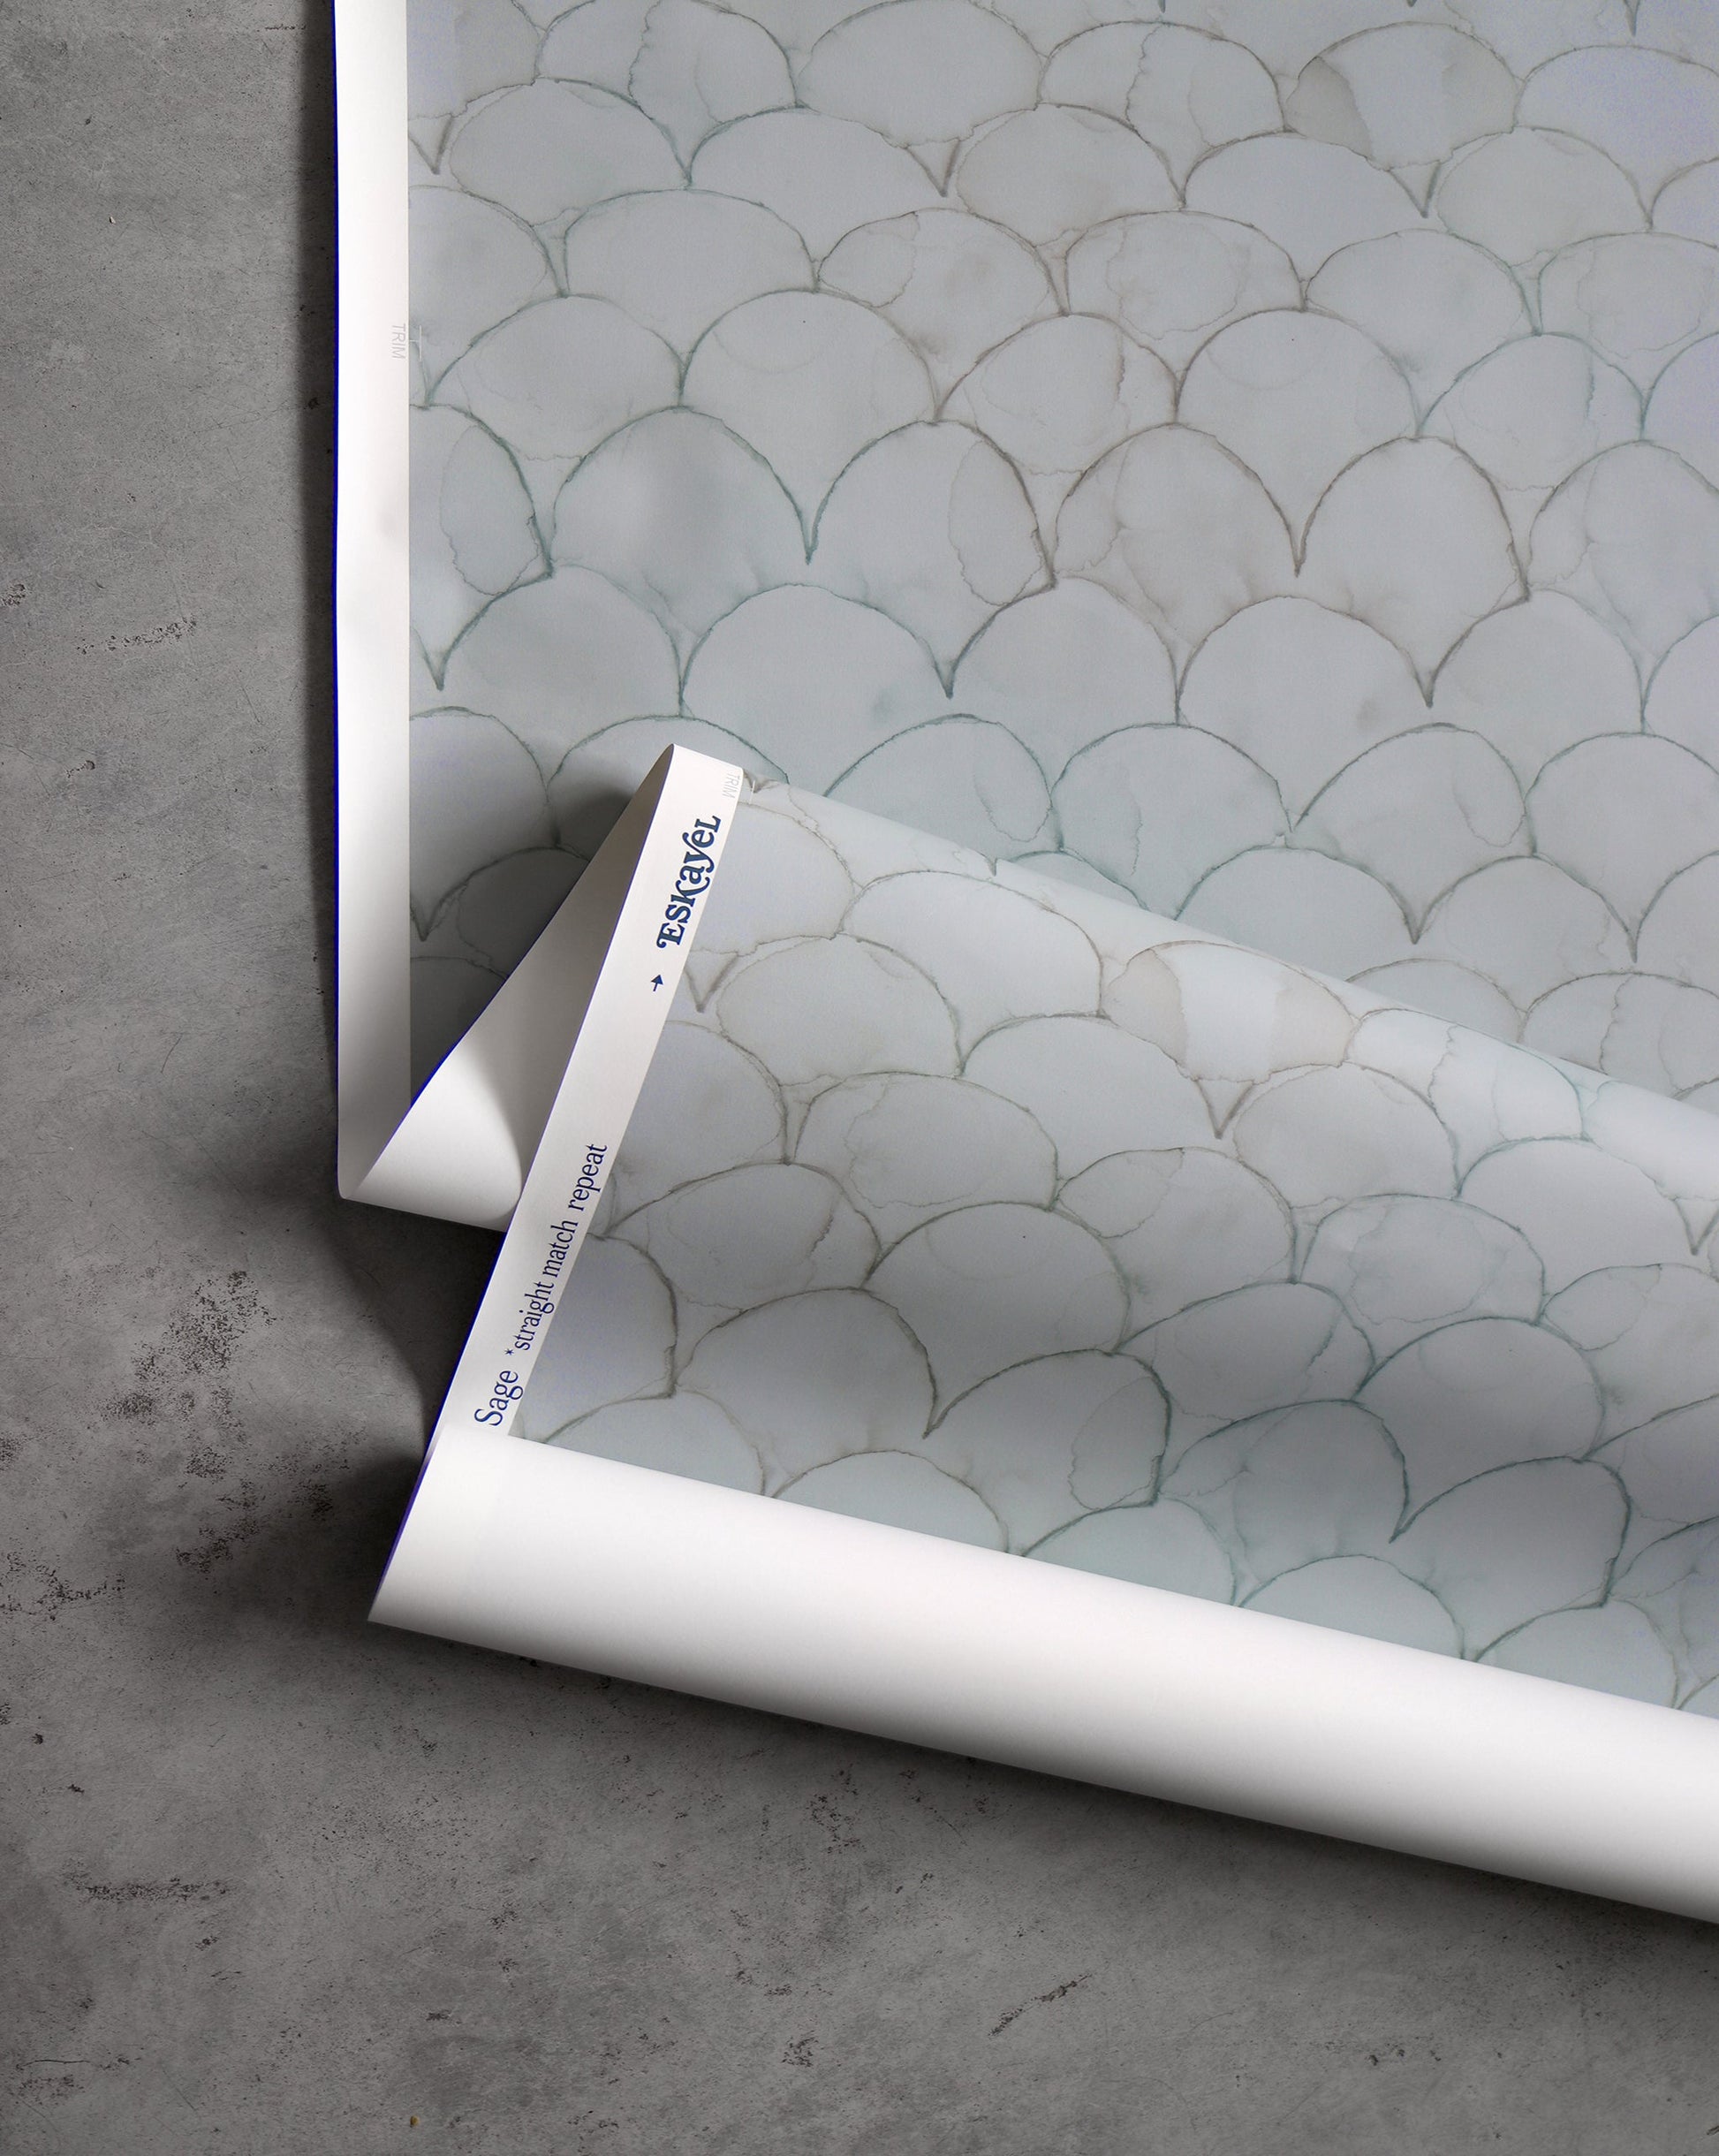 A roll of Baby Scallop Wallpaper Sage with a pattern of fish scales, inspired by tropical climates and natural patterns